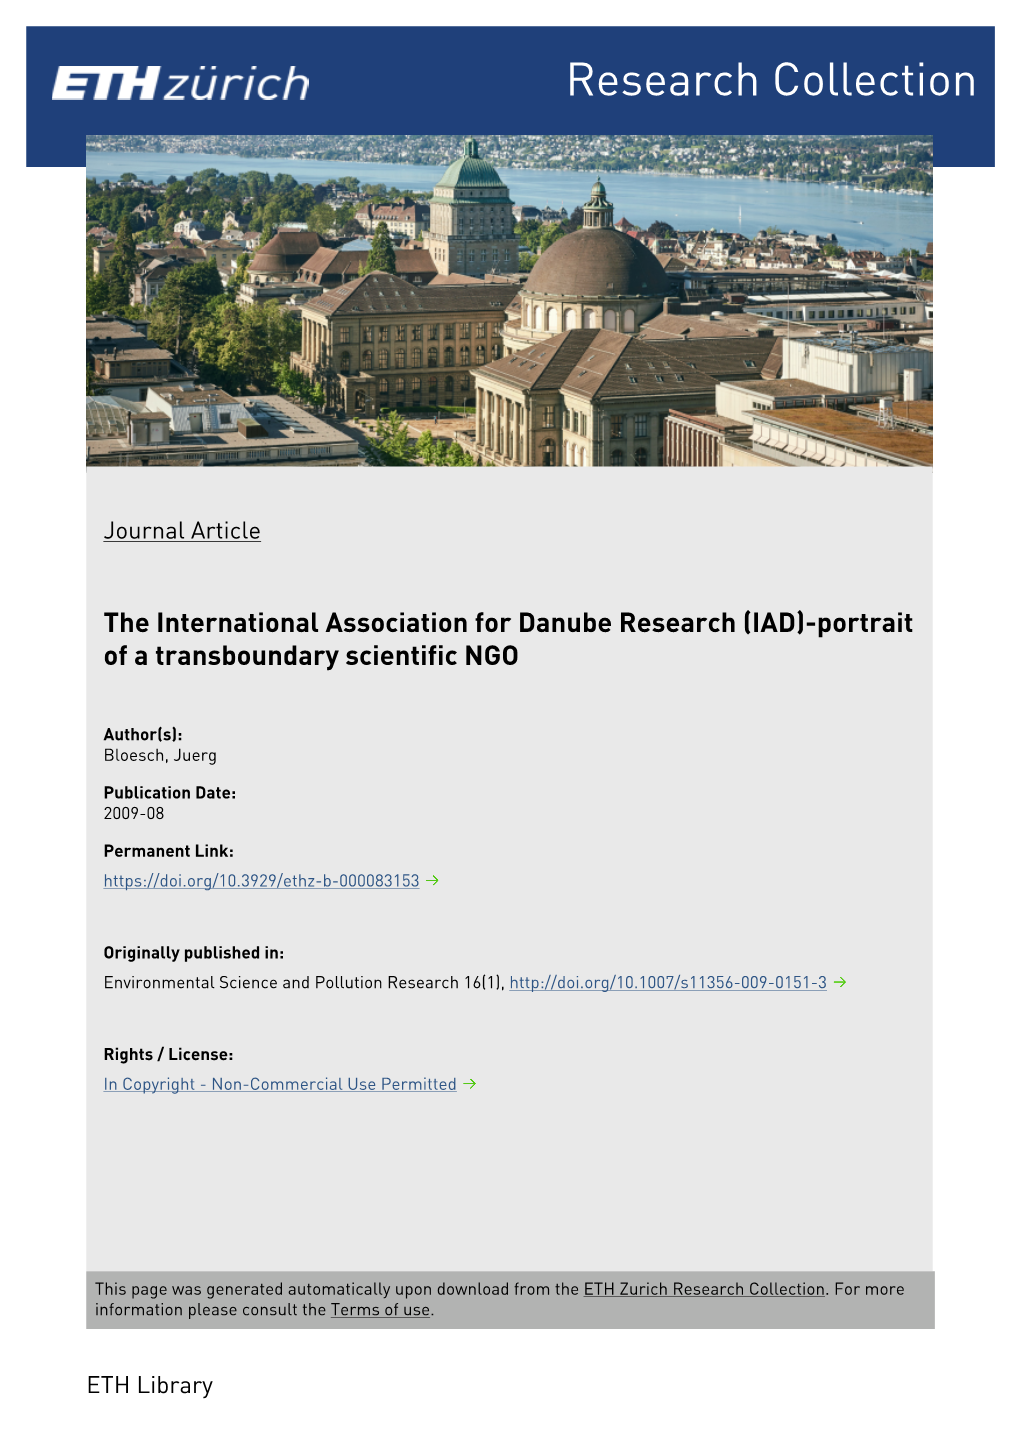 The International Association for Danube Research (IAD)-Portrait of a Transboundary Scientific NGO